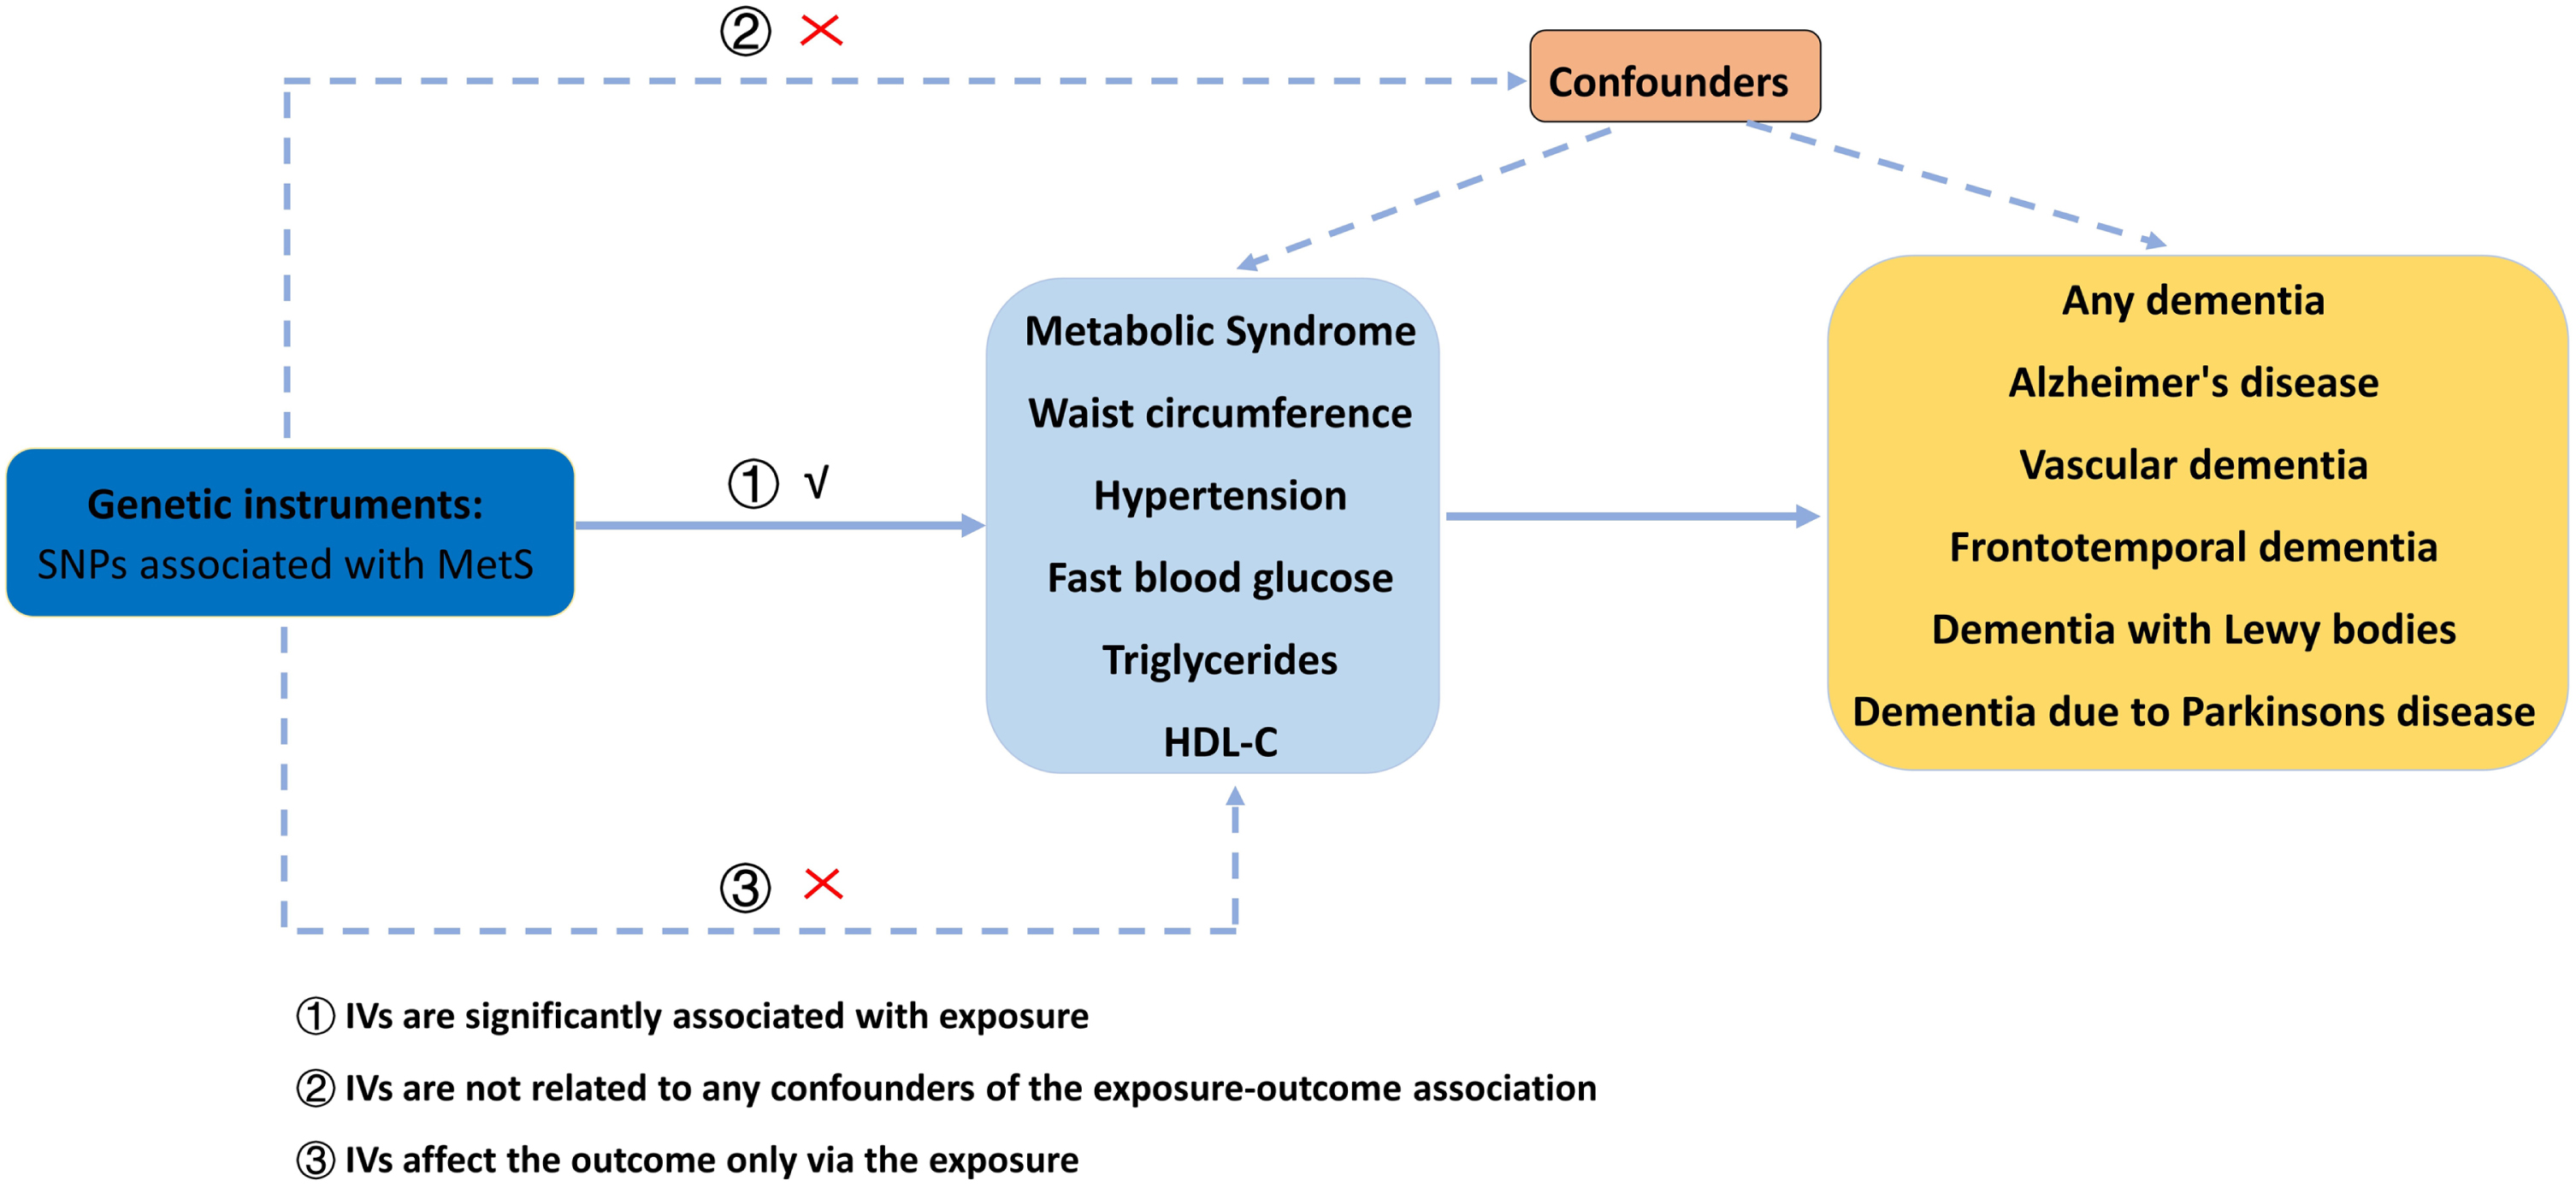 The flow chart of our MR analysis. MetS, metabolic syndrome; MR, Mendelian randomization; SNP, single nucleotide polymorphism; HDL-C, high-density lipoprotein cholesterol.